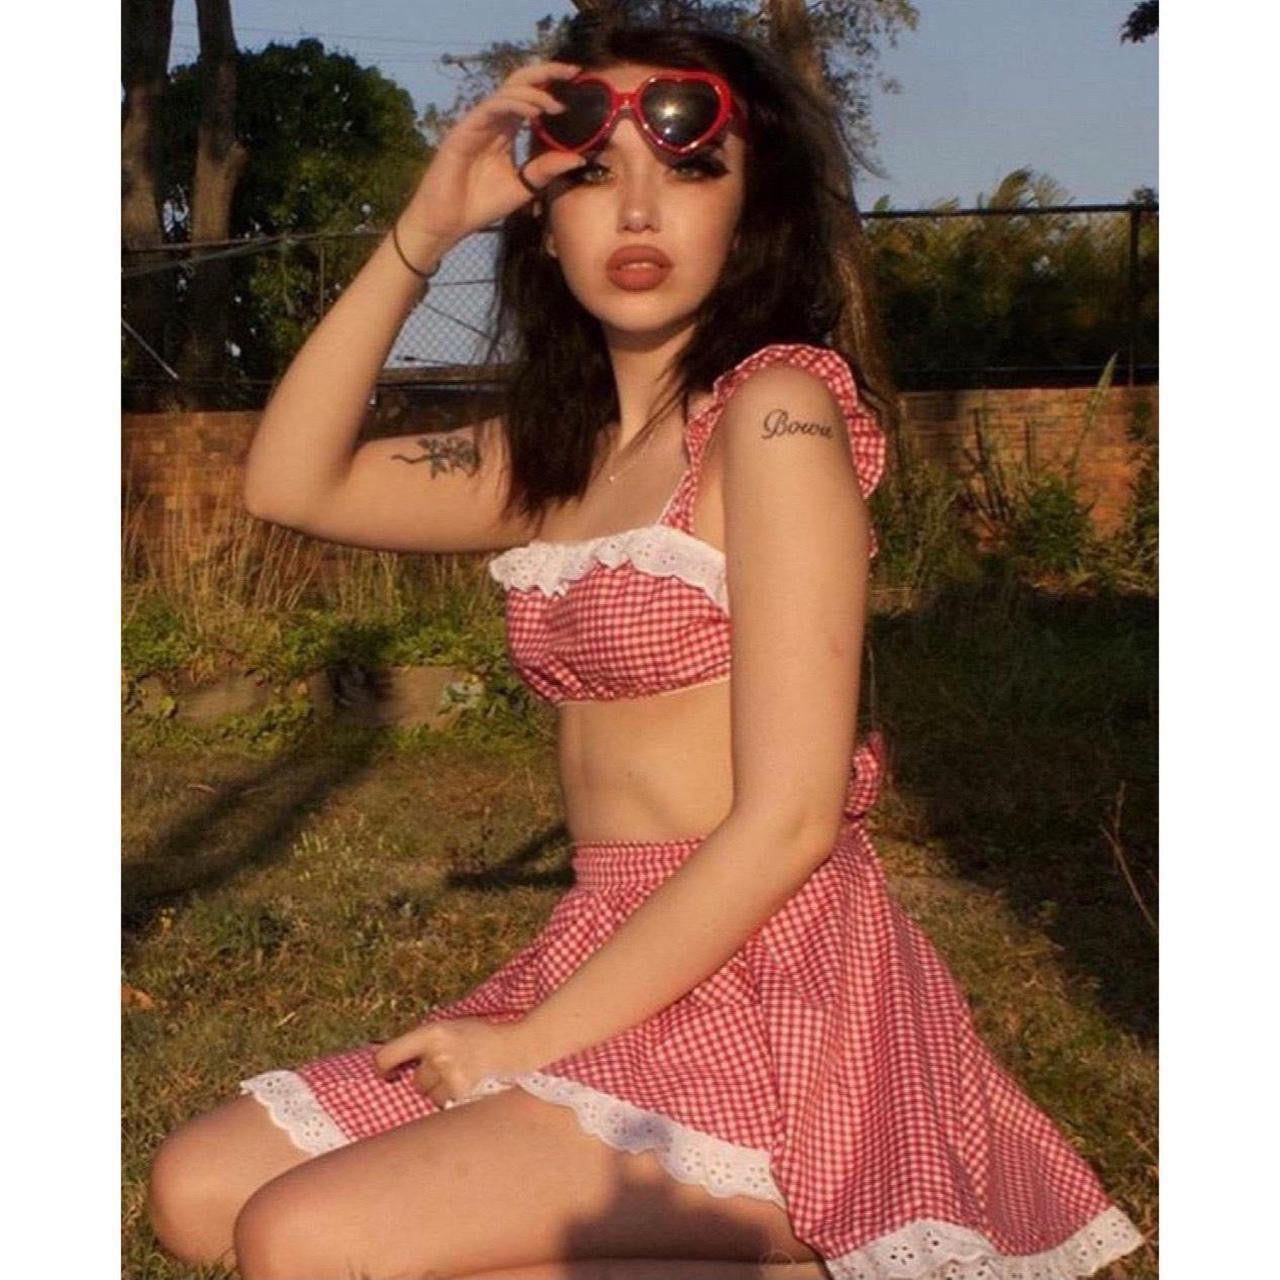 The Darla Set in Red Gingham